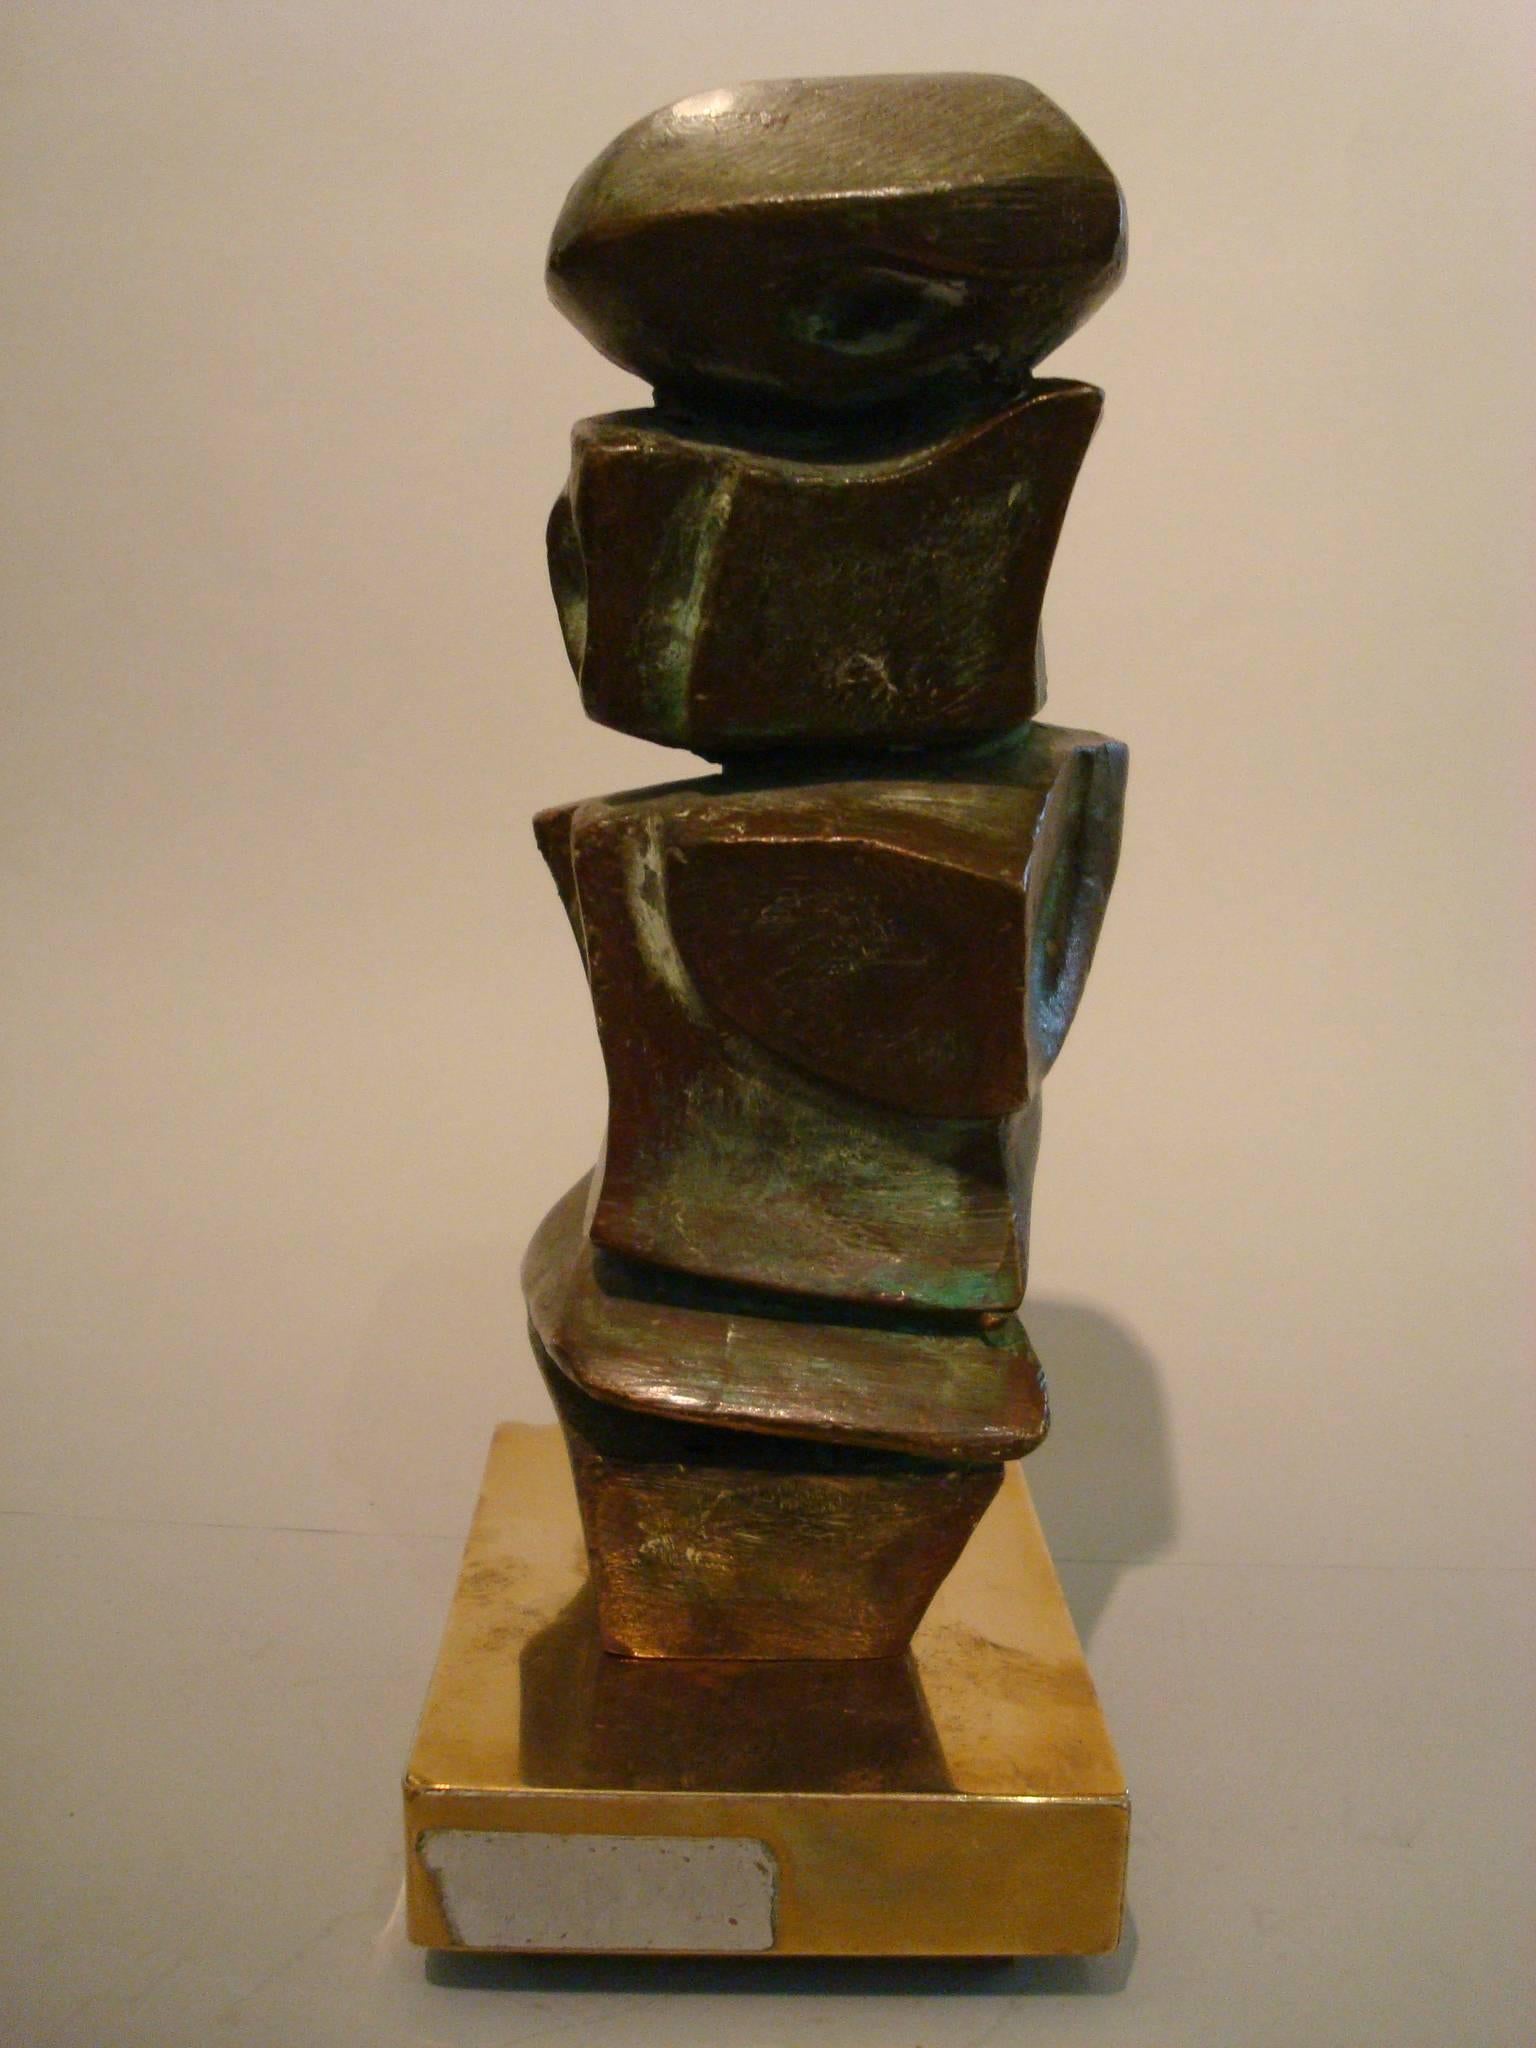 Bronze sculpture by listed artist Domenico Calabrone (1928-2000). Modern Abstract. Signed Calabrone 038.
He was born in Italy and then moved to Brazil. His works are in collections worldwide.
This sculpture is from 1960s.
It still has an original